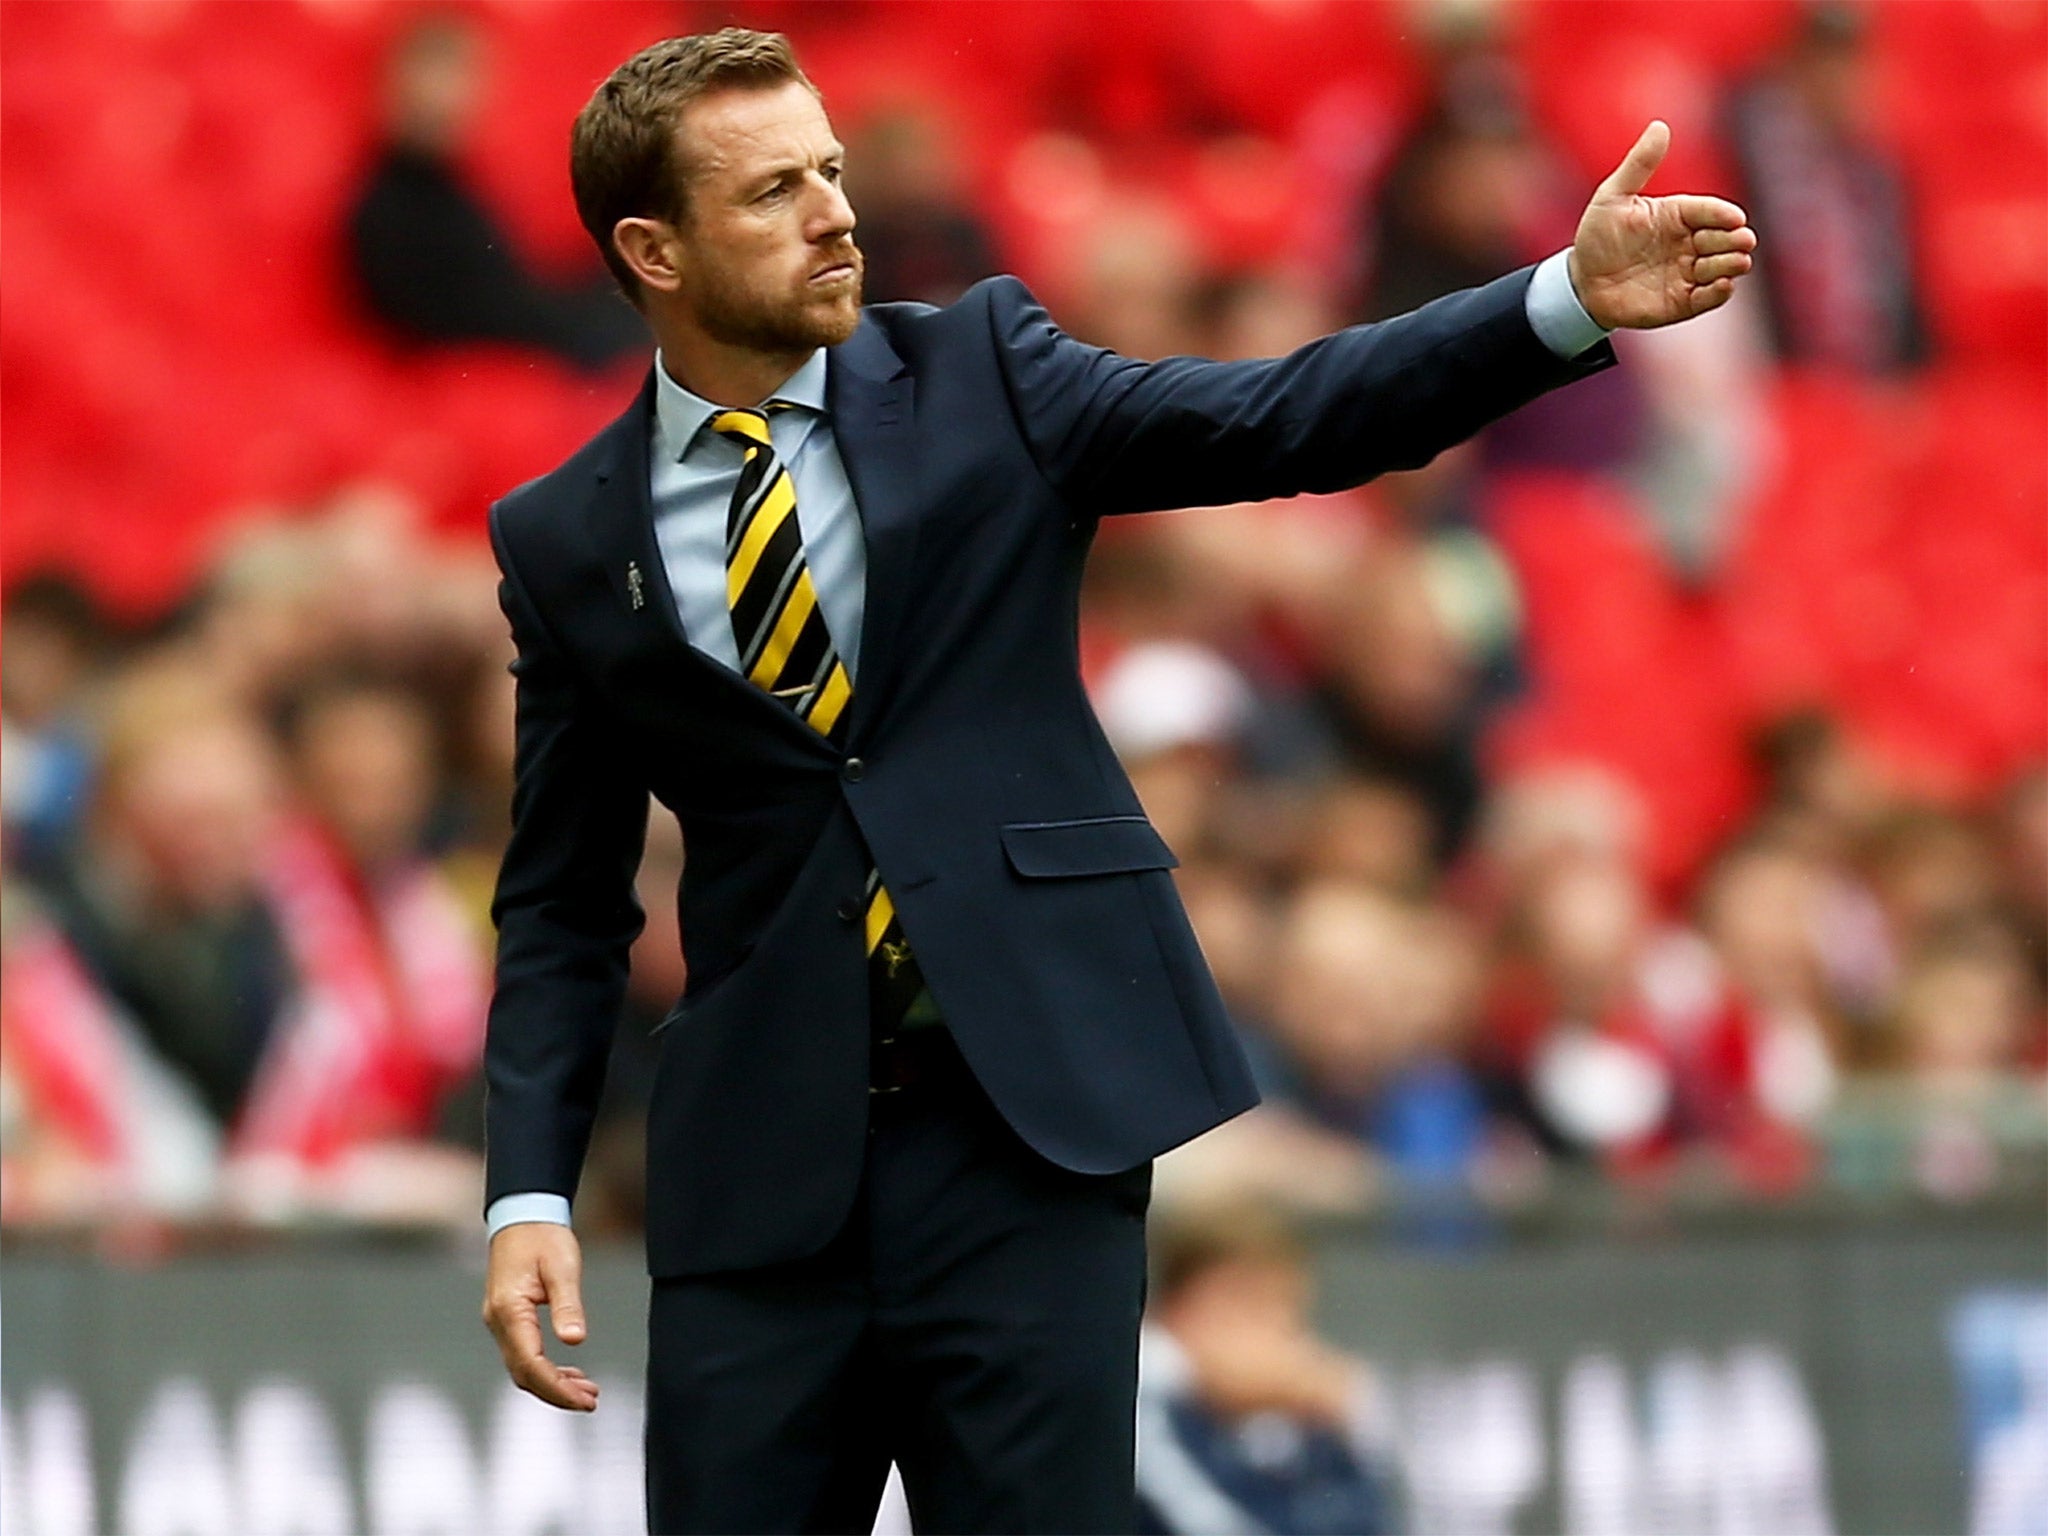 Gary Rowett’s side have bounced back from May’s Wembley defeat to make their best start in 58 years